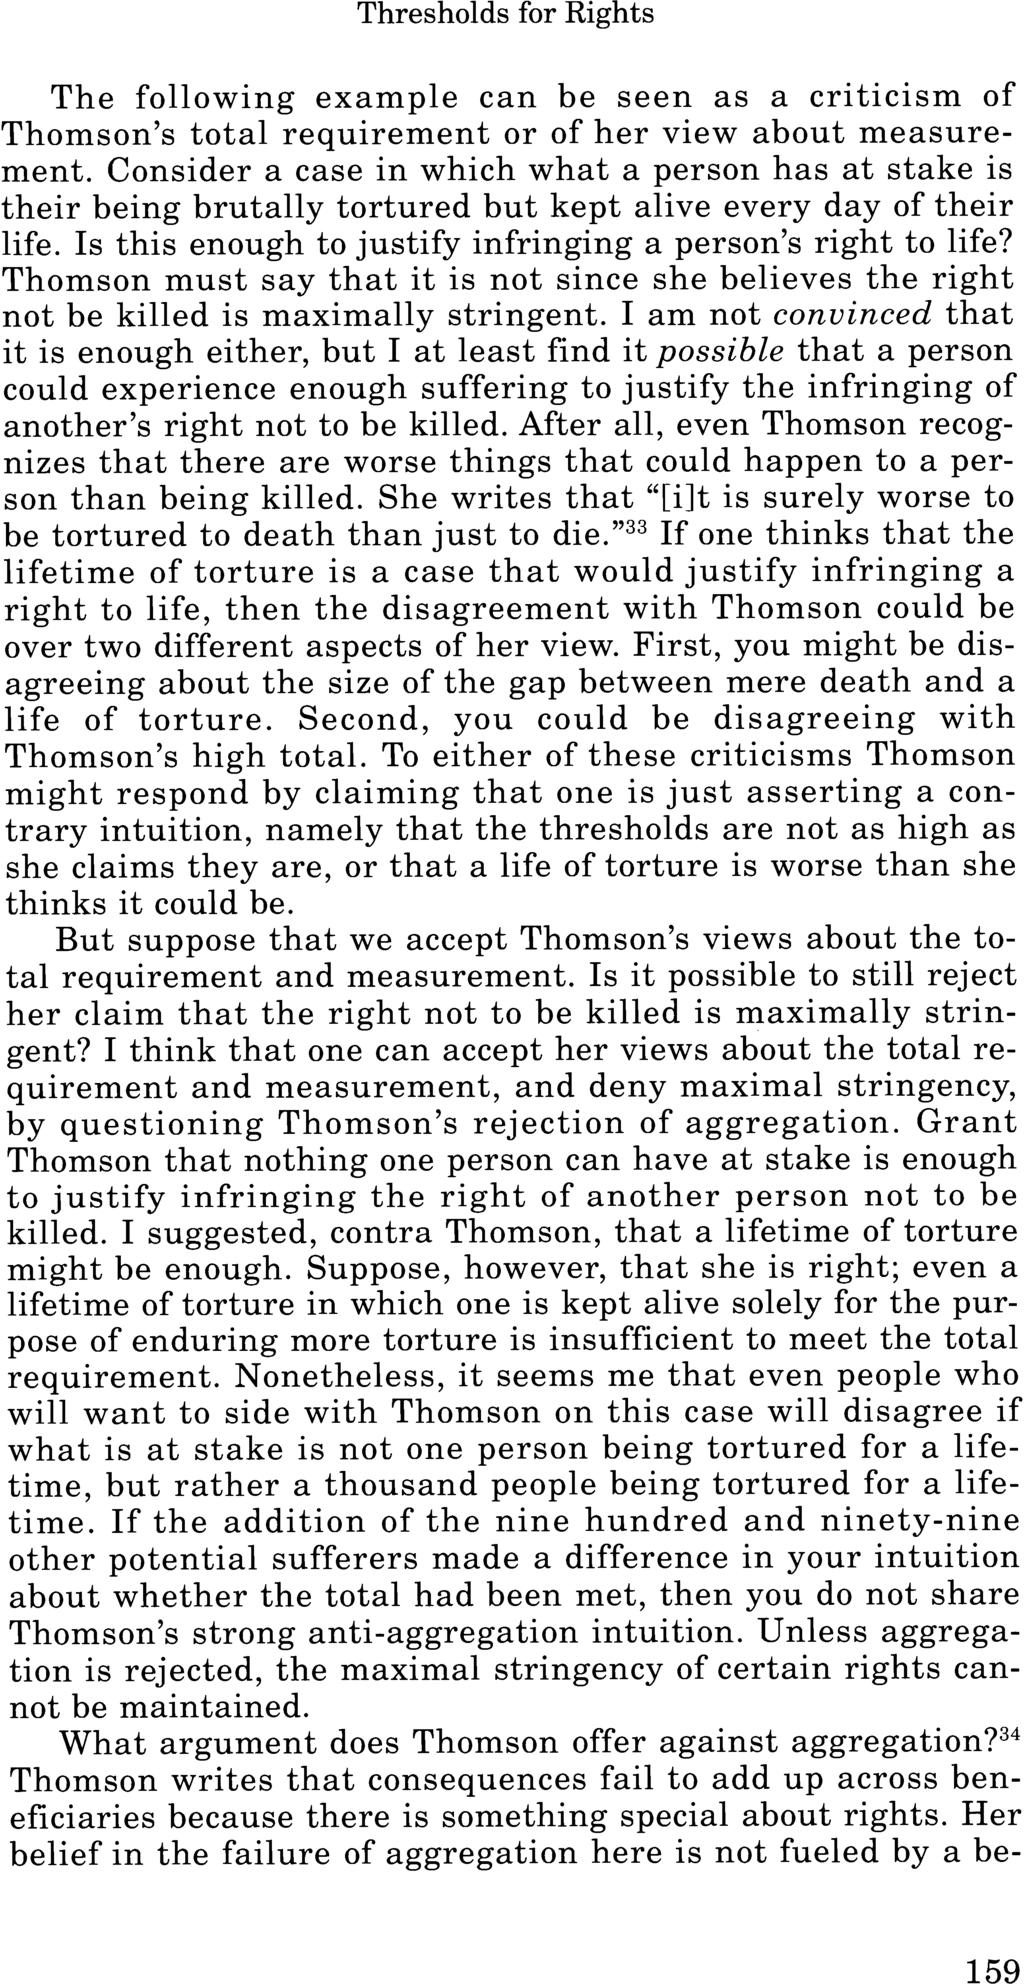 Thresholds for Rights The following example can be seen as a criticism of Thomson's total requirement or of her view about measurement.